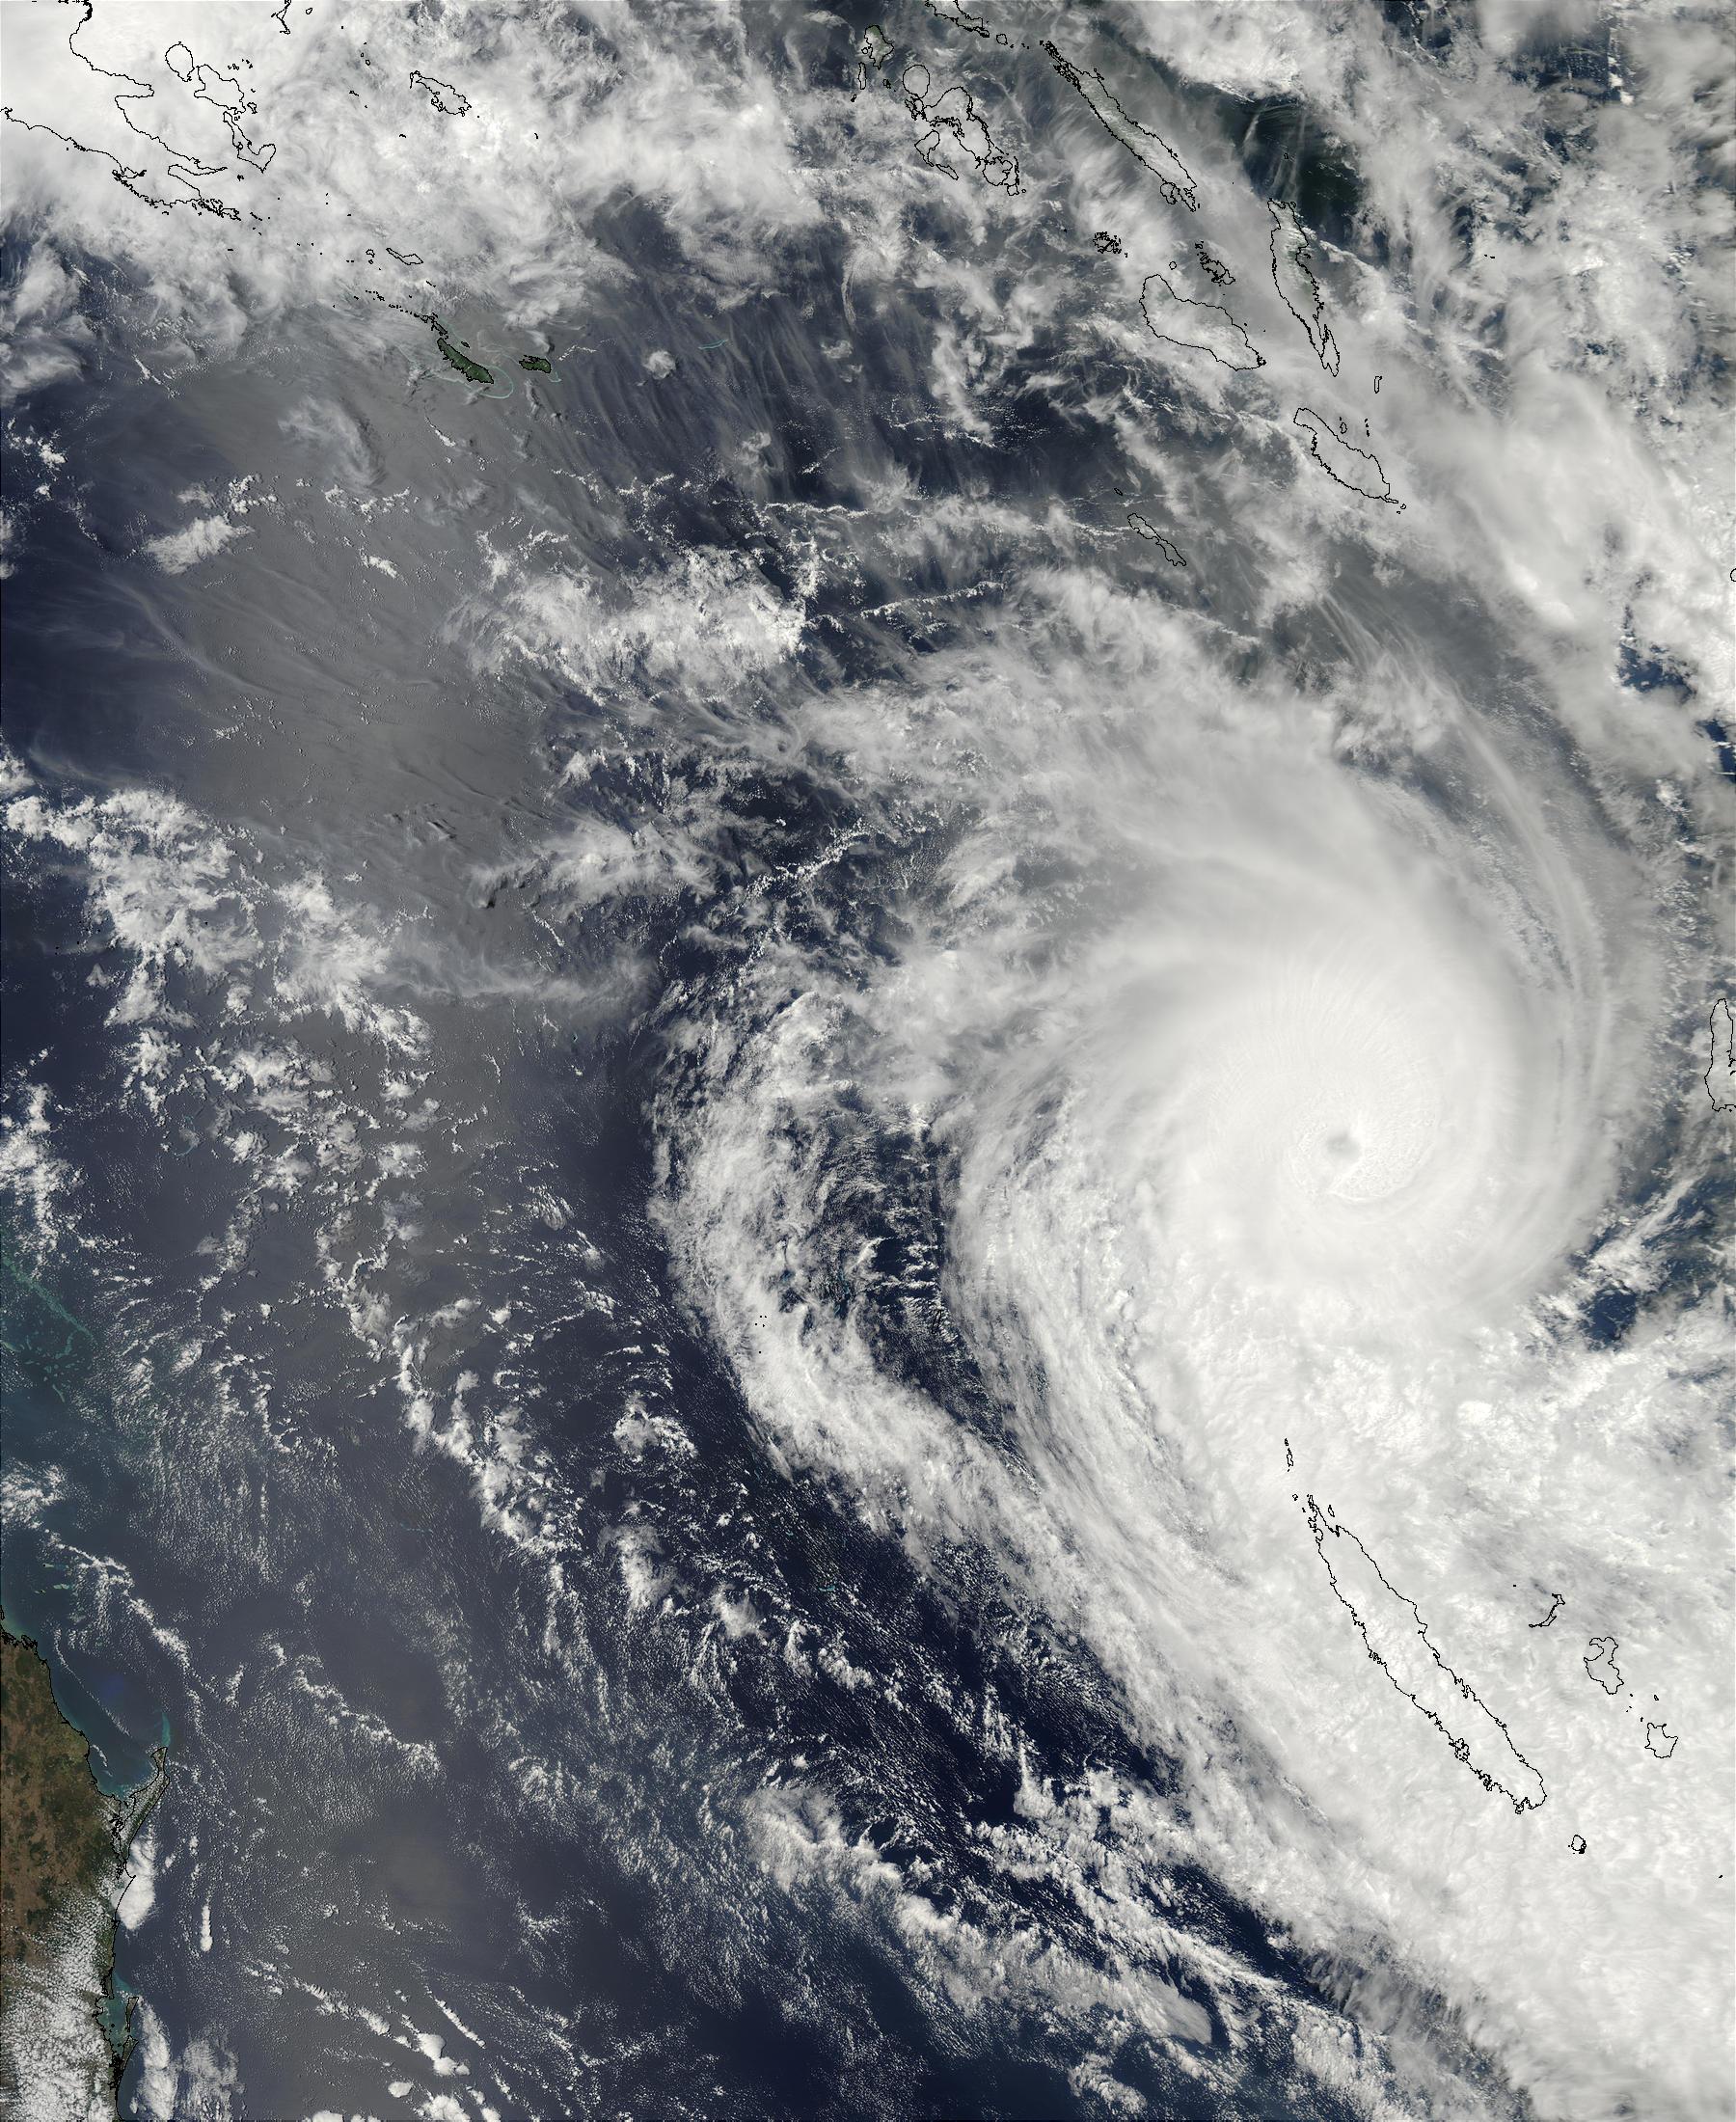 Tropical Cyclone Beni (12P), north of New Caledonia, Pacific Ocean - related image preview